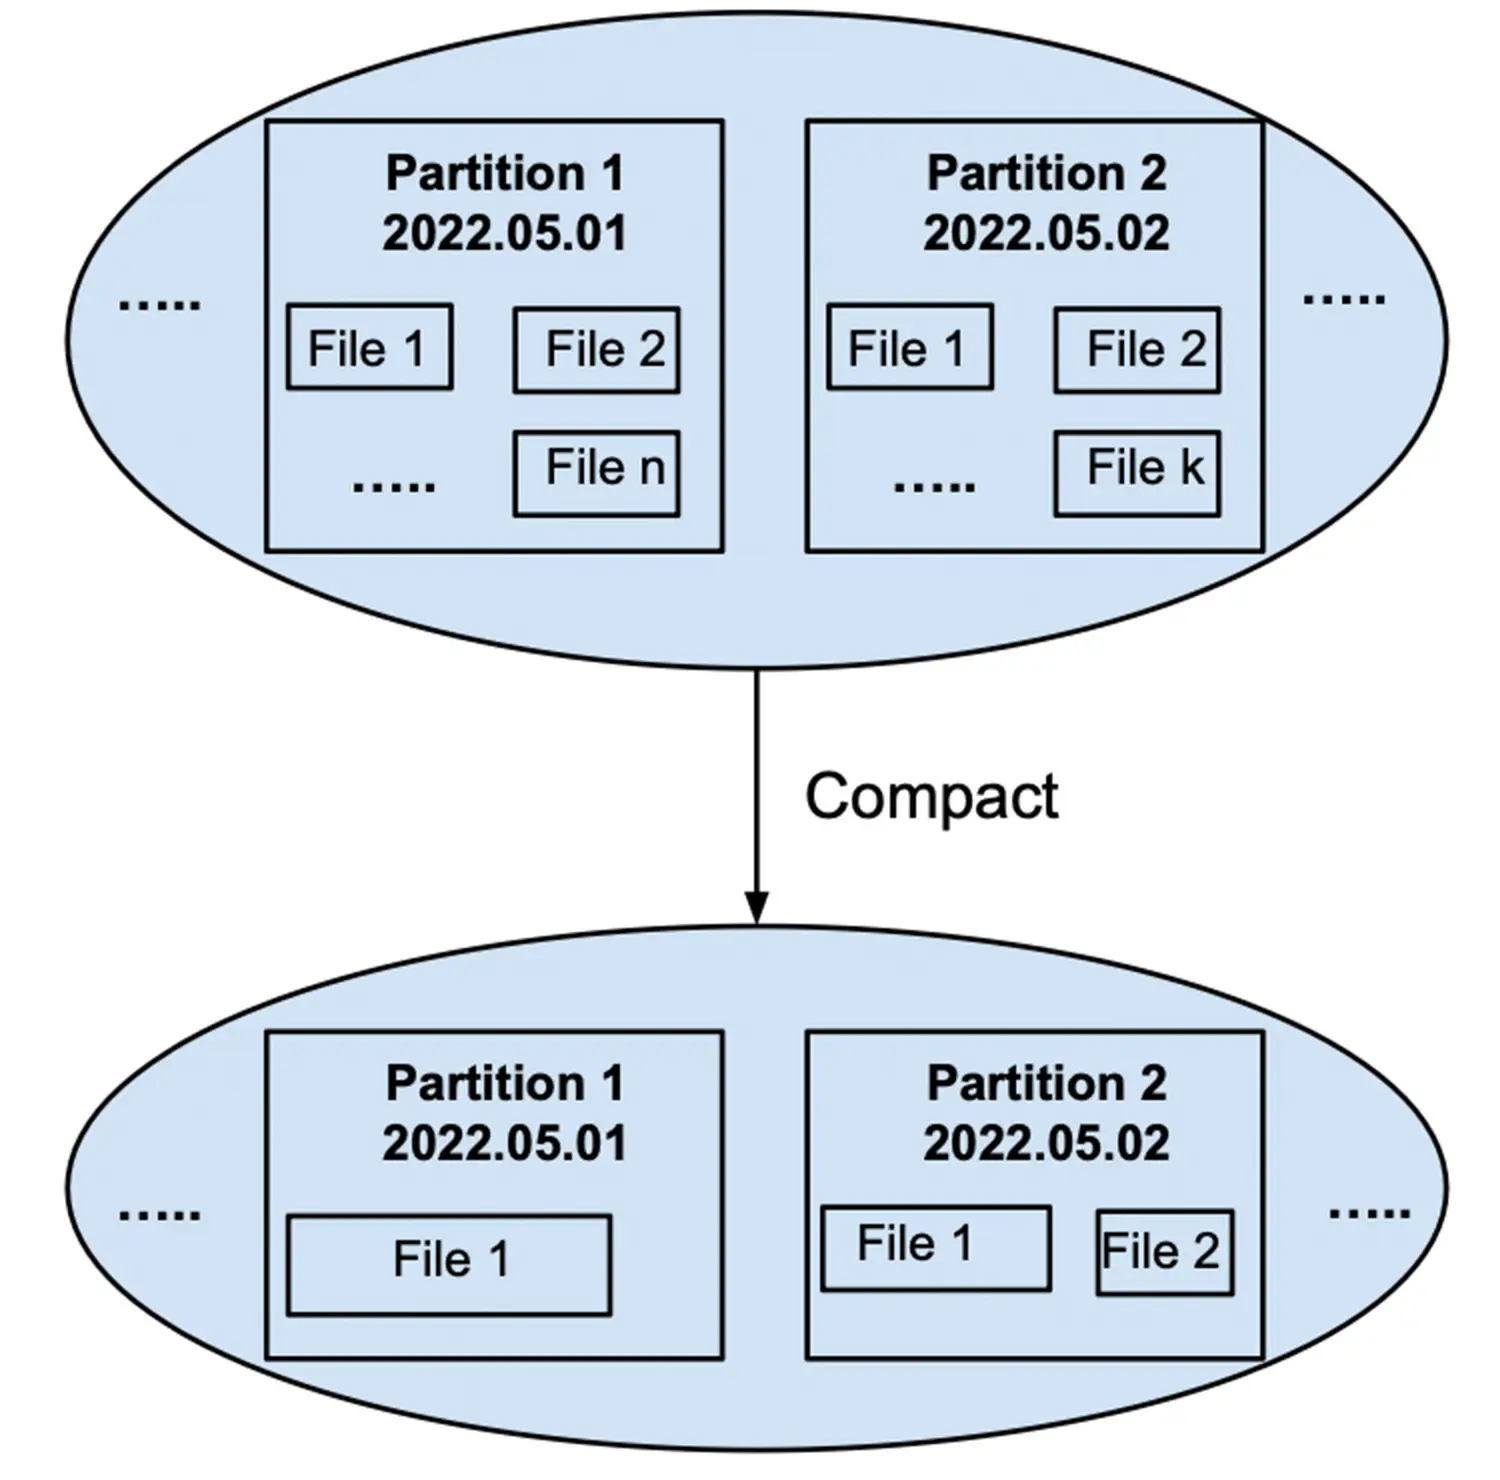 Figure 6- Compacting several files of a partition into one or few files